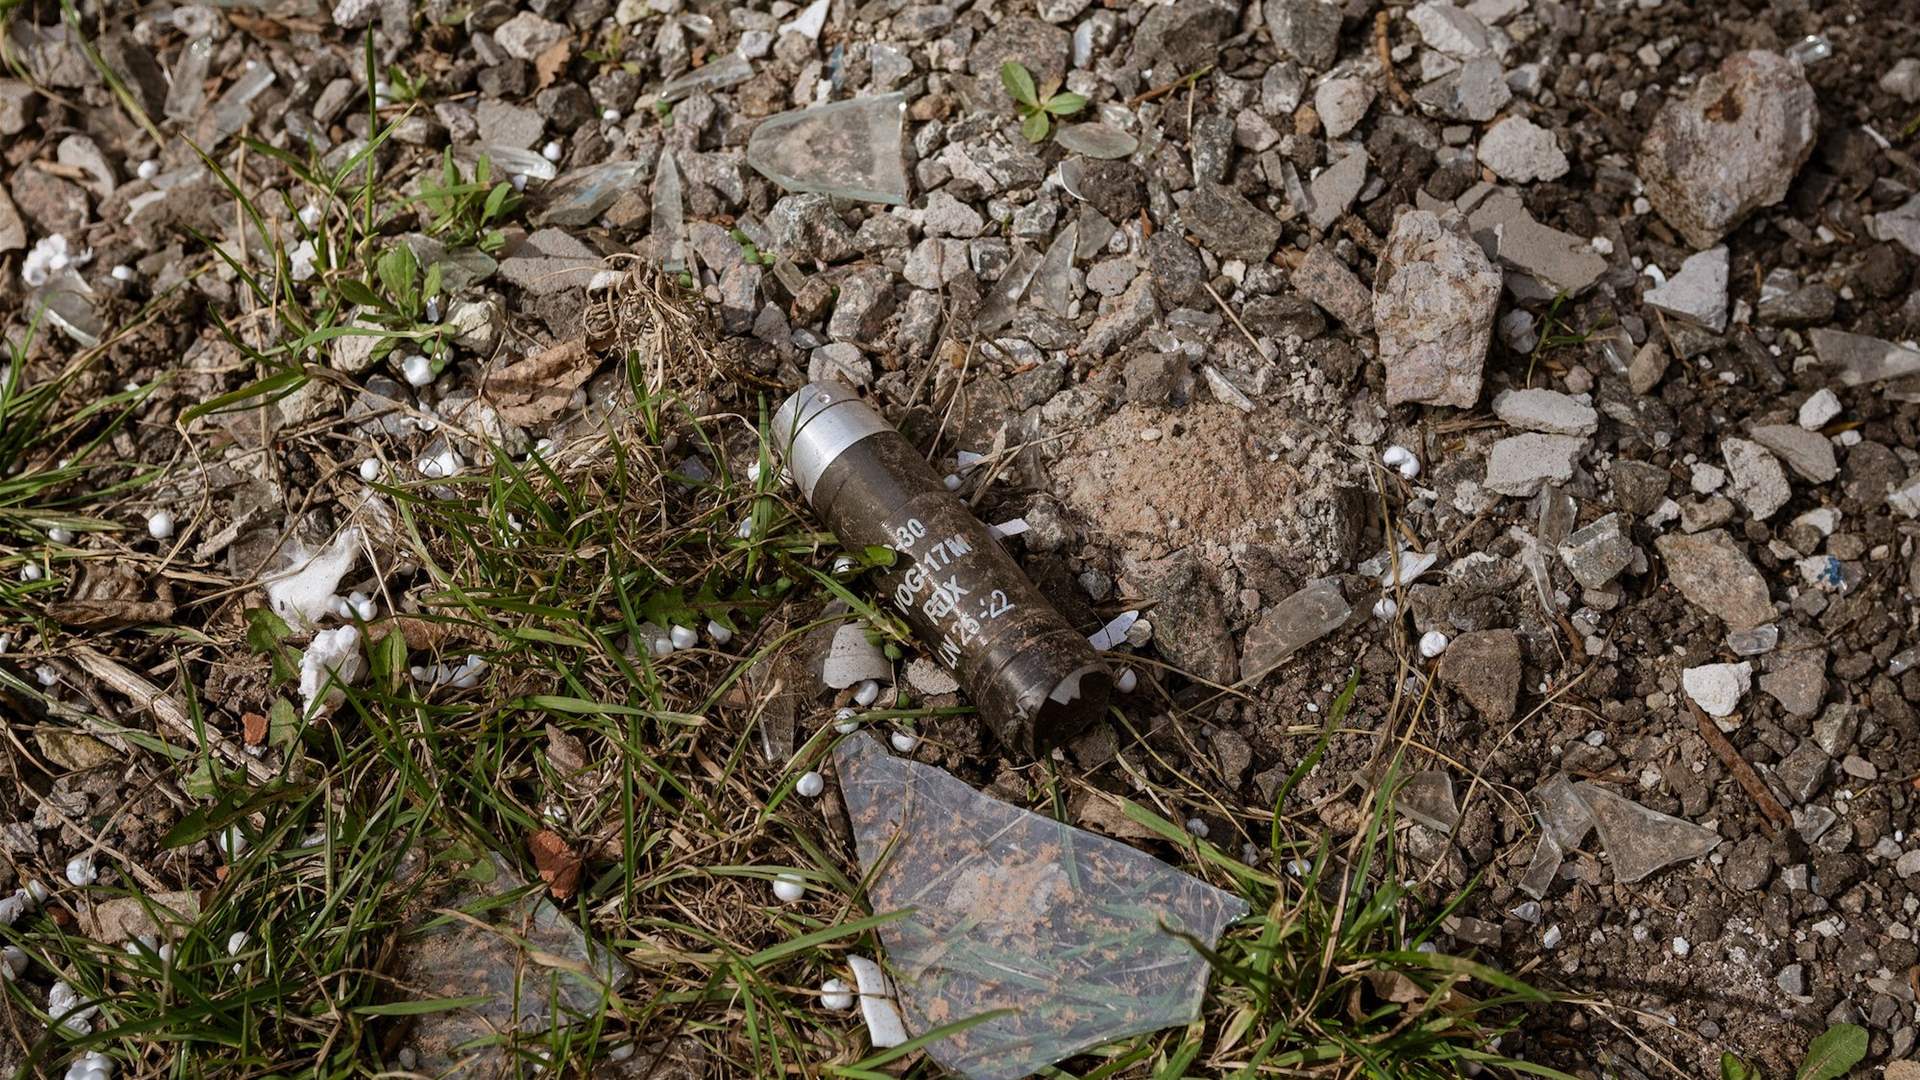 Lingering threat: Unexploded cluster bombs haunt southern Lebanon